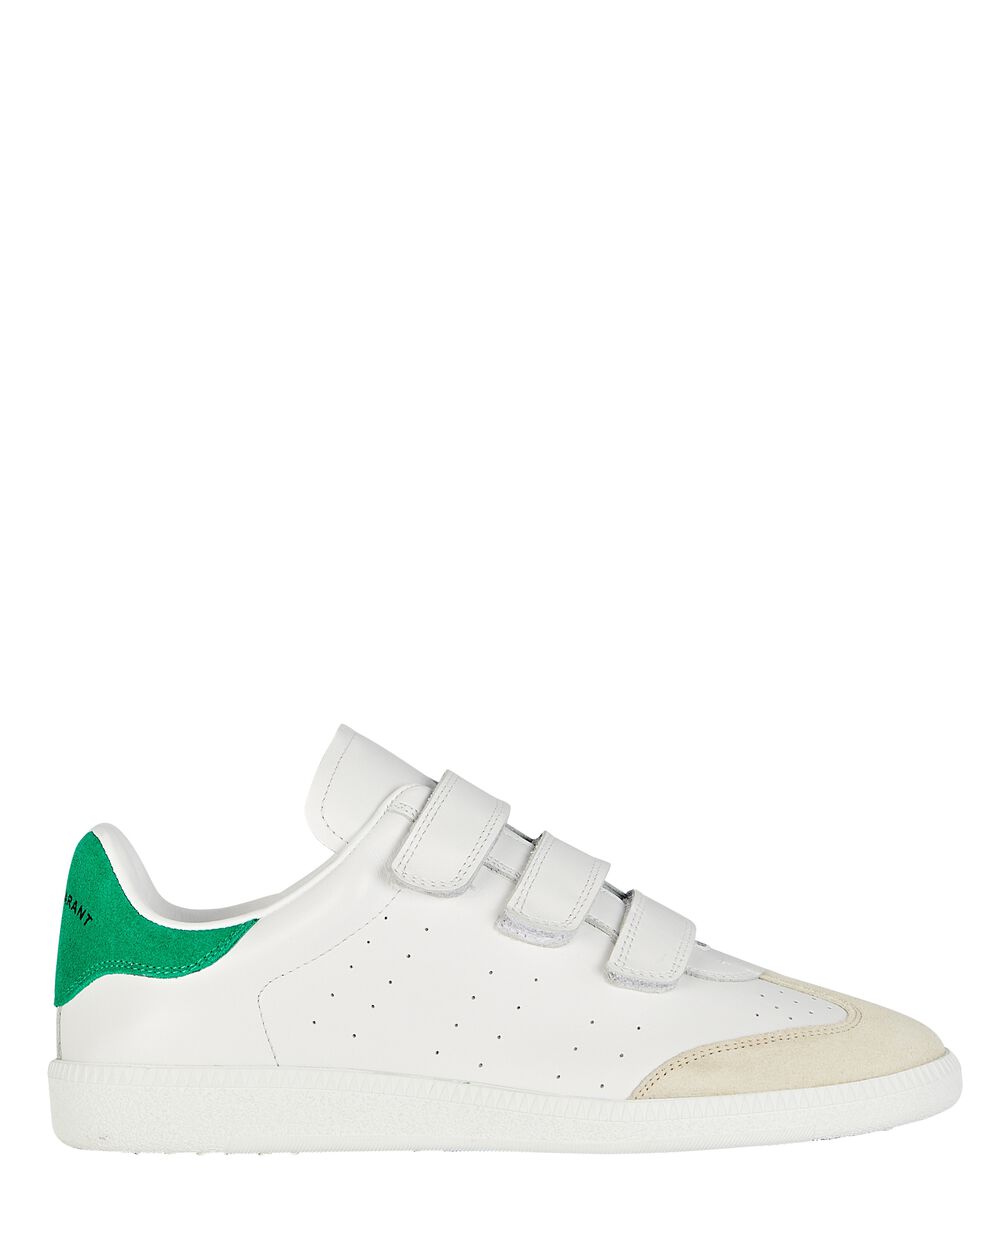 Isabel Marant Beth Velcro Suede Sneakers | INTERMIX®